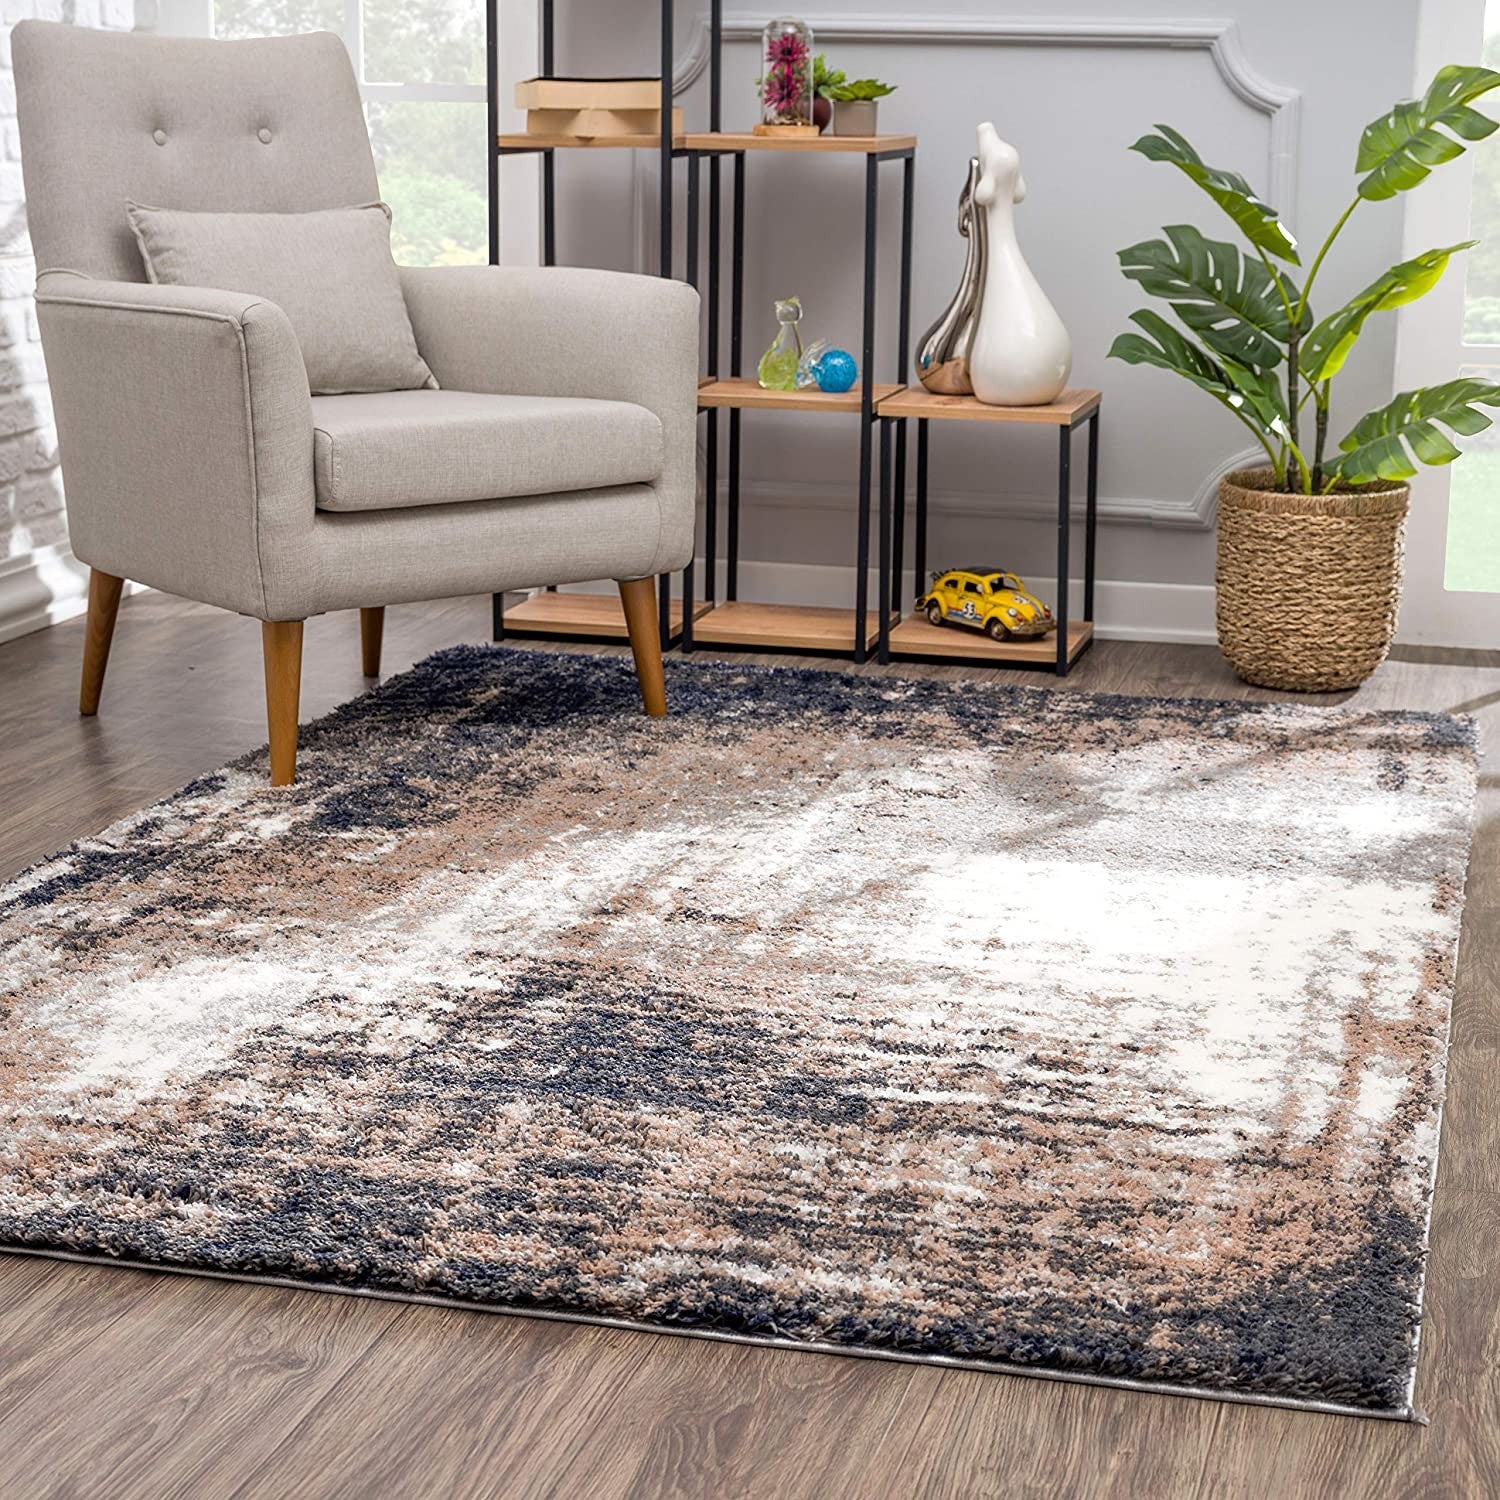 4’ X 6’ Ivory And Navy Retro Modern Area Rug